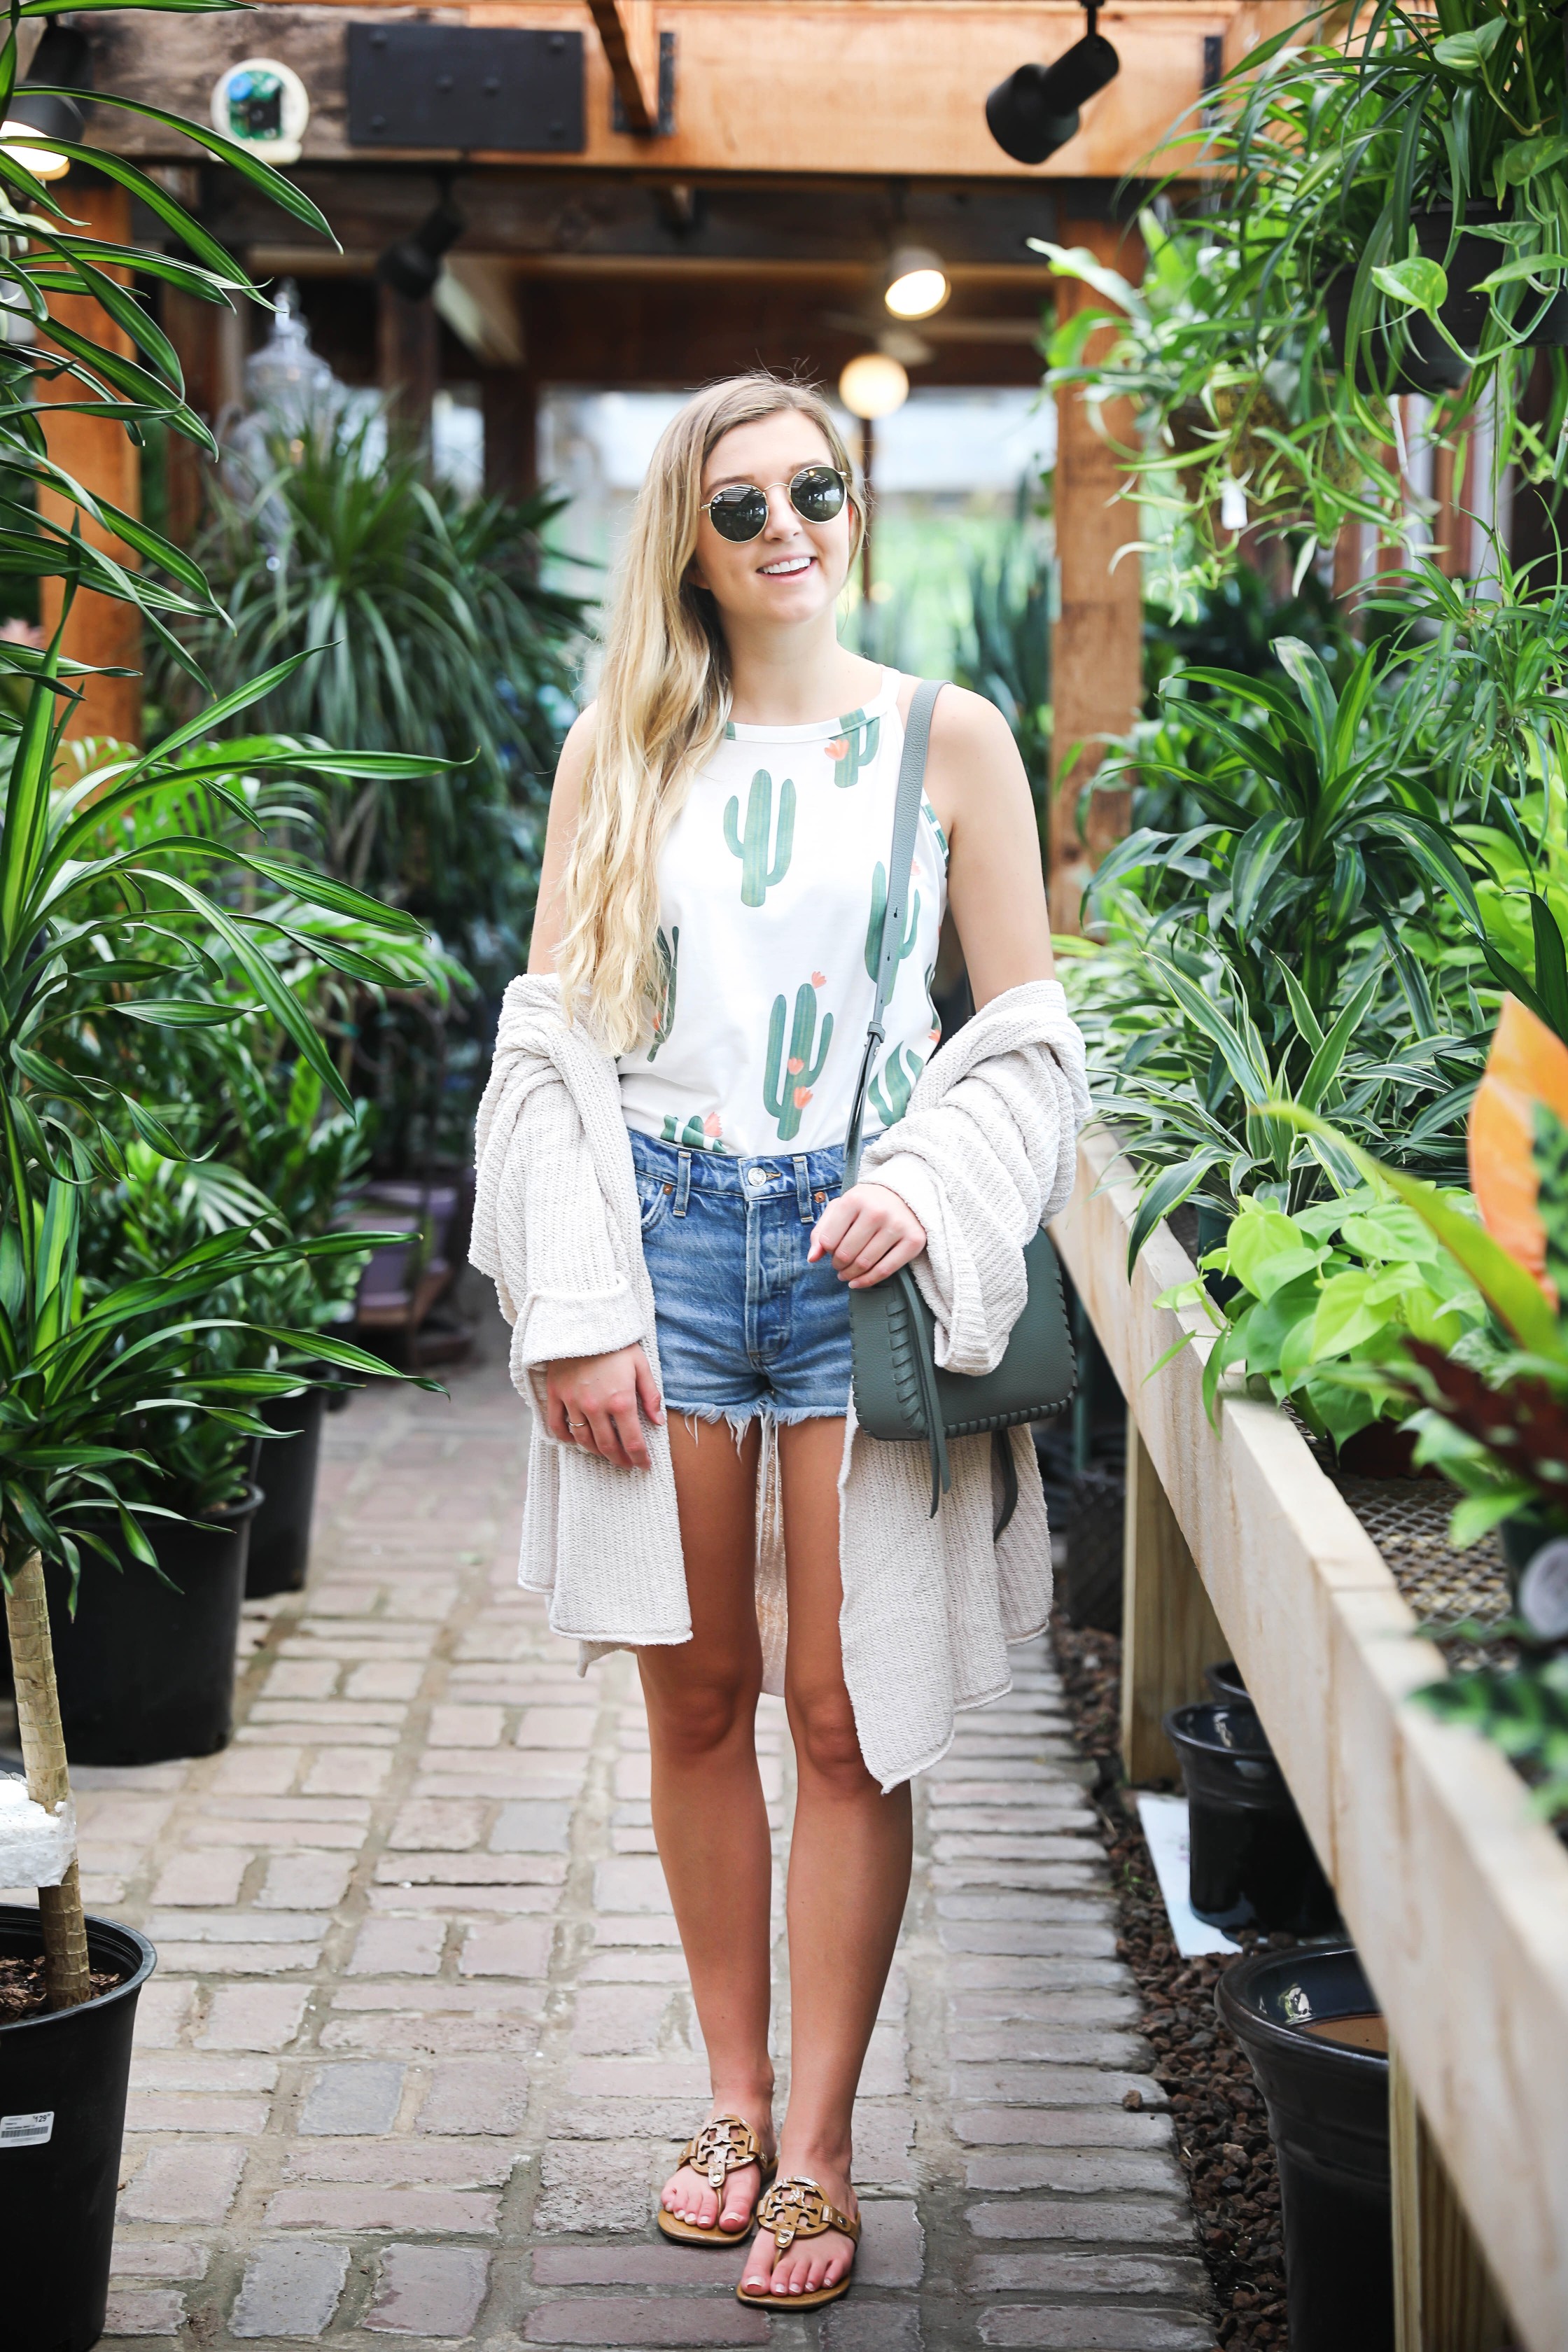 Cutest cactus top! Not only is it adorable, but it's inexpensive! I paired them with jean shorts, my favorite cream free people cardigan, my new allsaints bag, Tory Burch Millers, and Ray Ban sunglasses! The cutest summer outfit shot at a flower and plant nursery! Details on fashion blog daily dose of charm by lauren lindmark